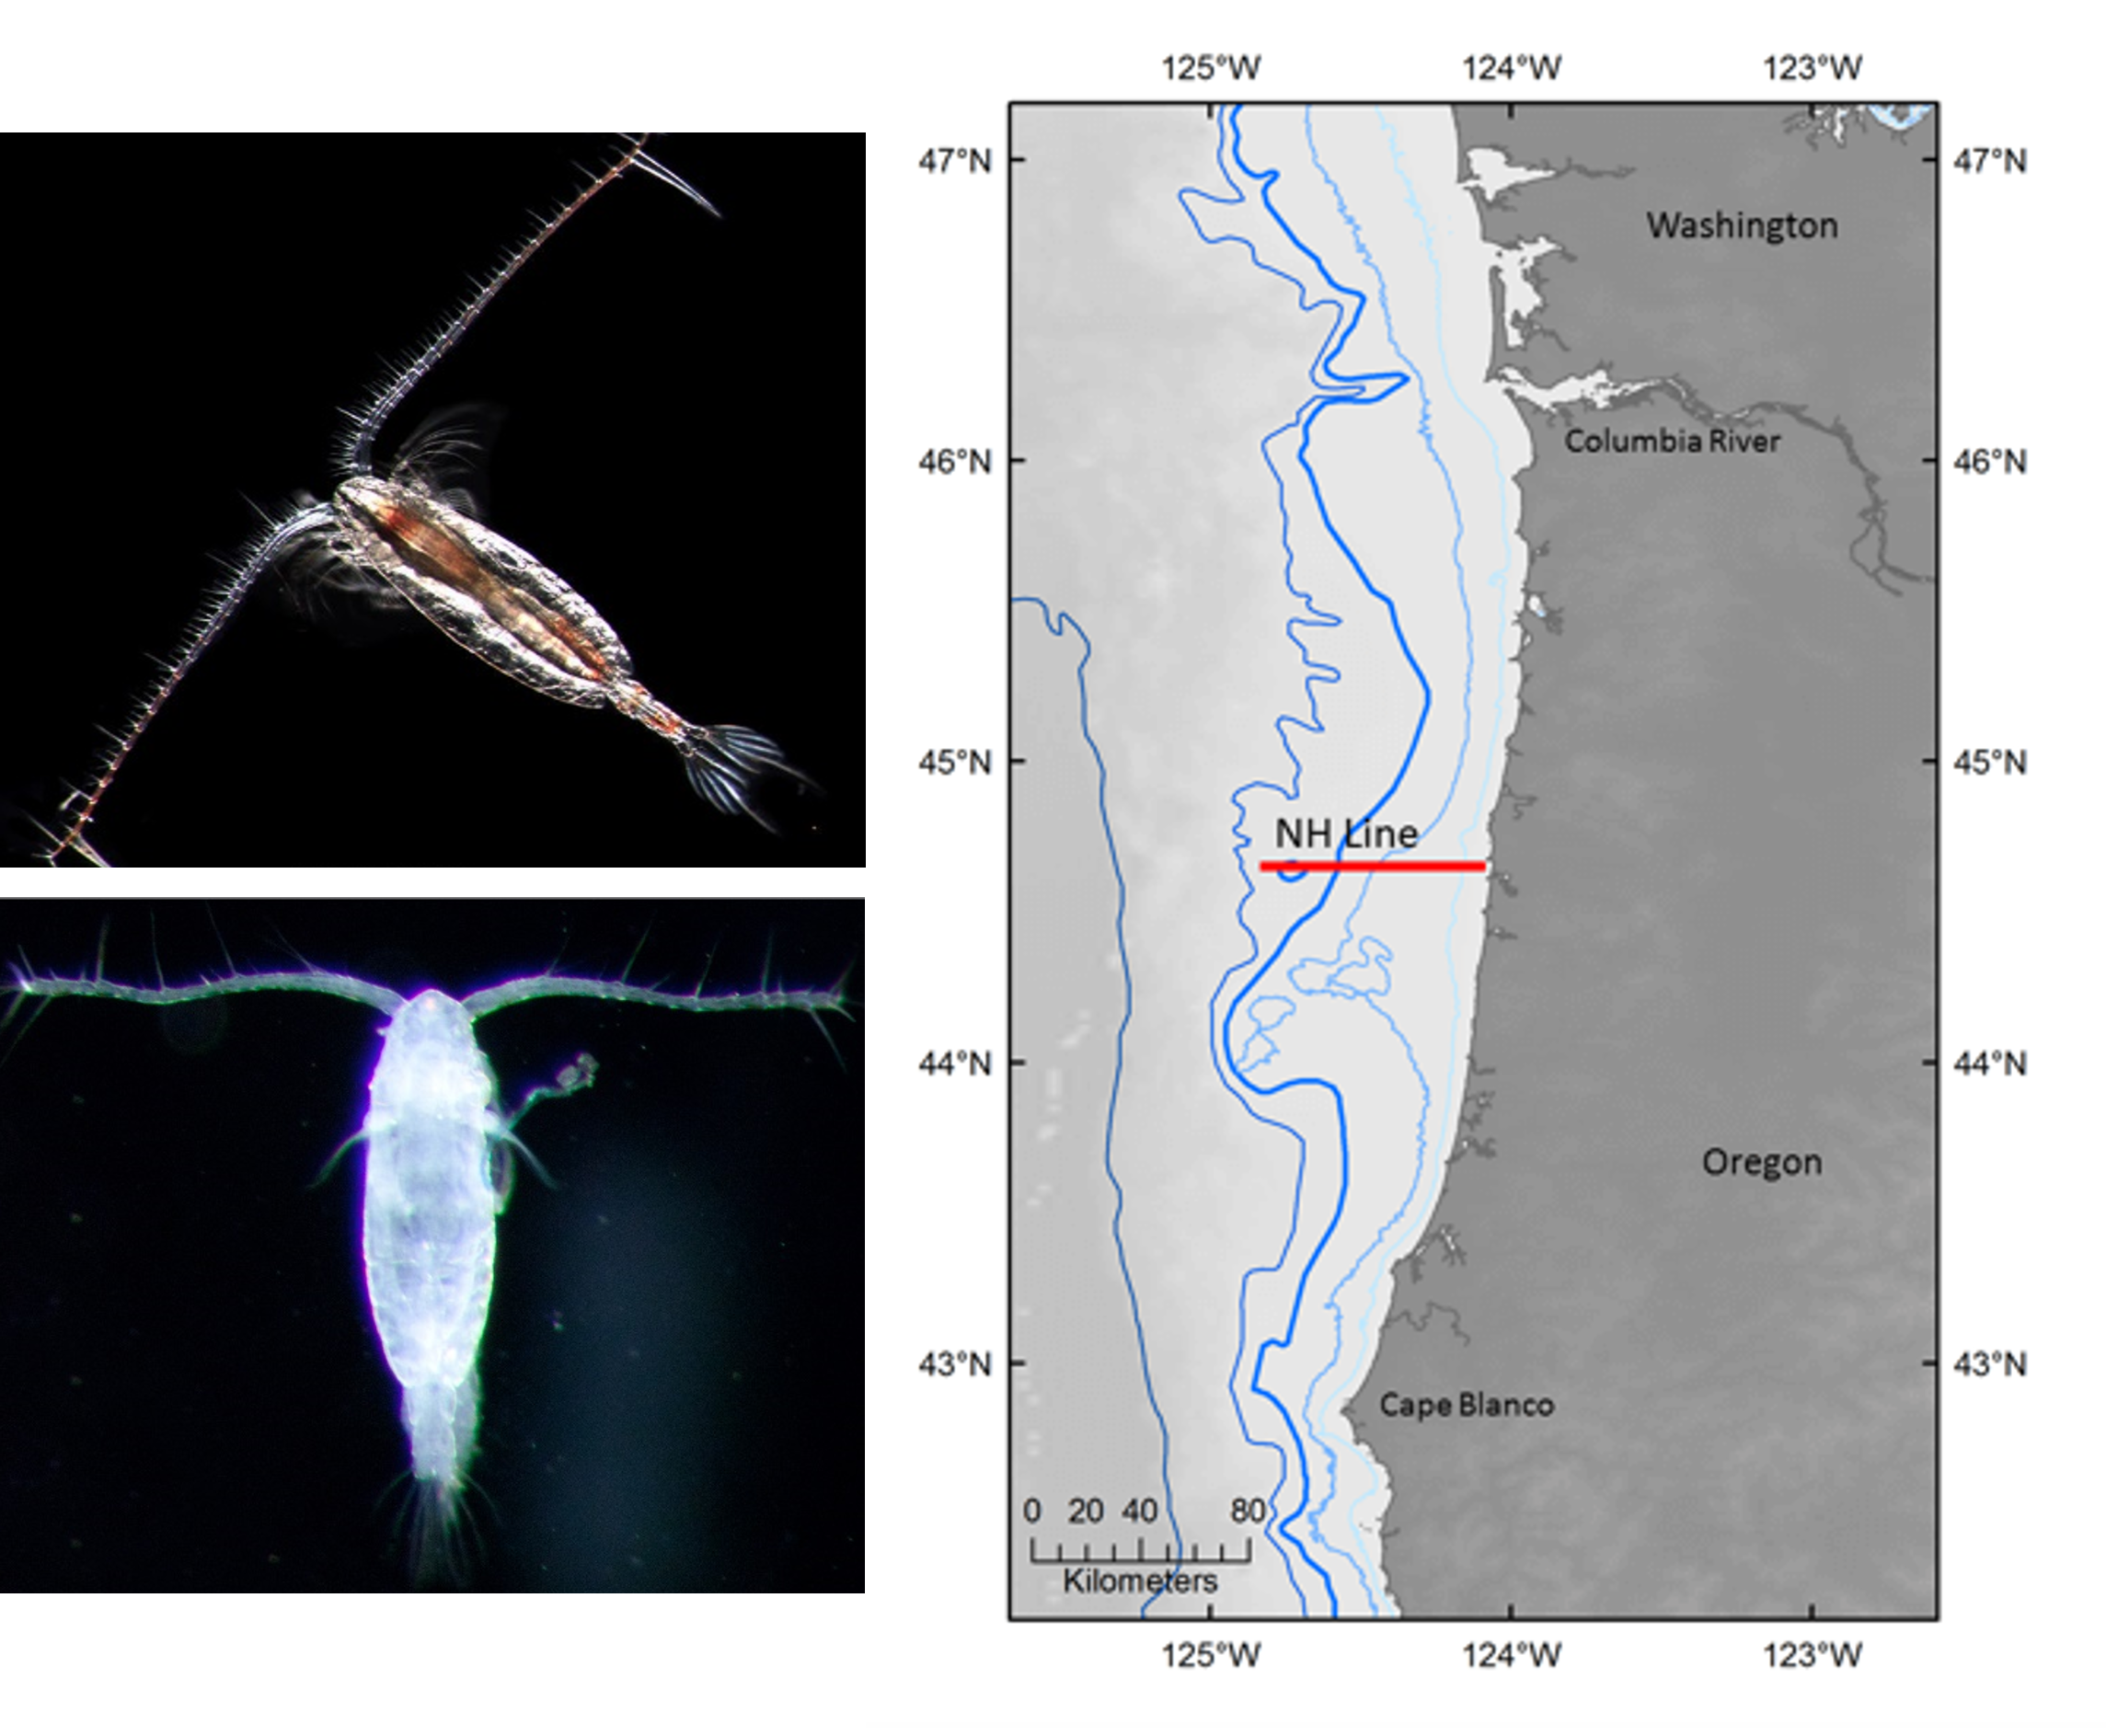 On the left are images of copepod species (Calanus marshallae (top left) Acartia tonsa (bottom left)) and on the right is a map of the copepod populations locations. 